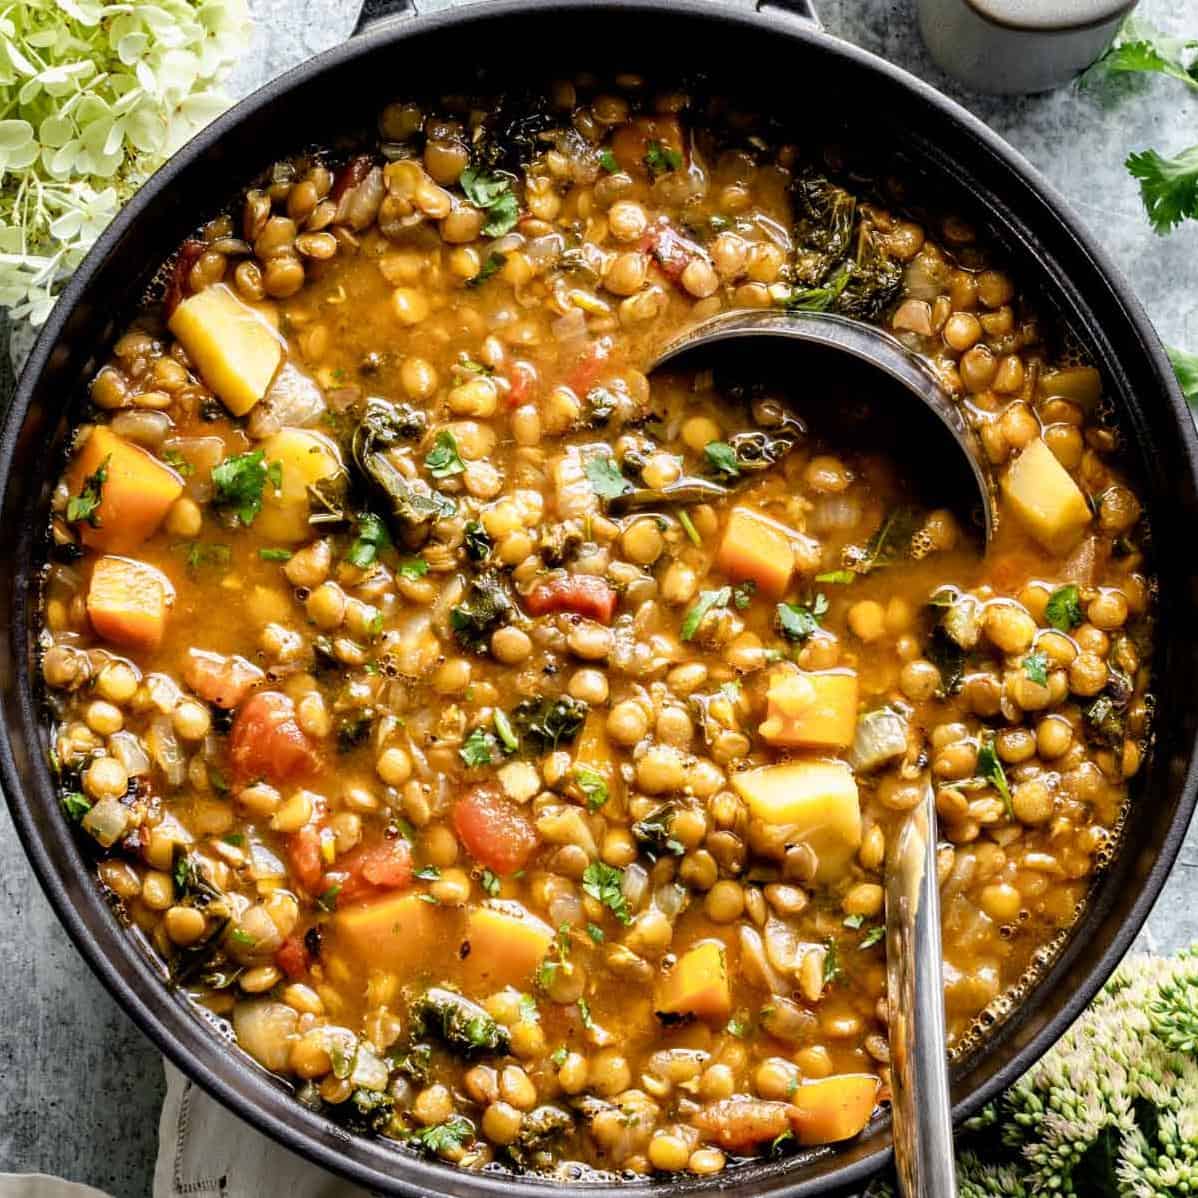  Warm yourself up with a bowl of this hearty lentil soup.